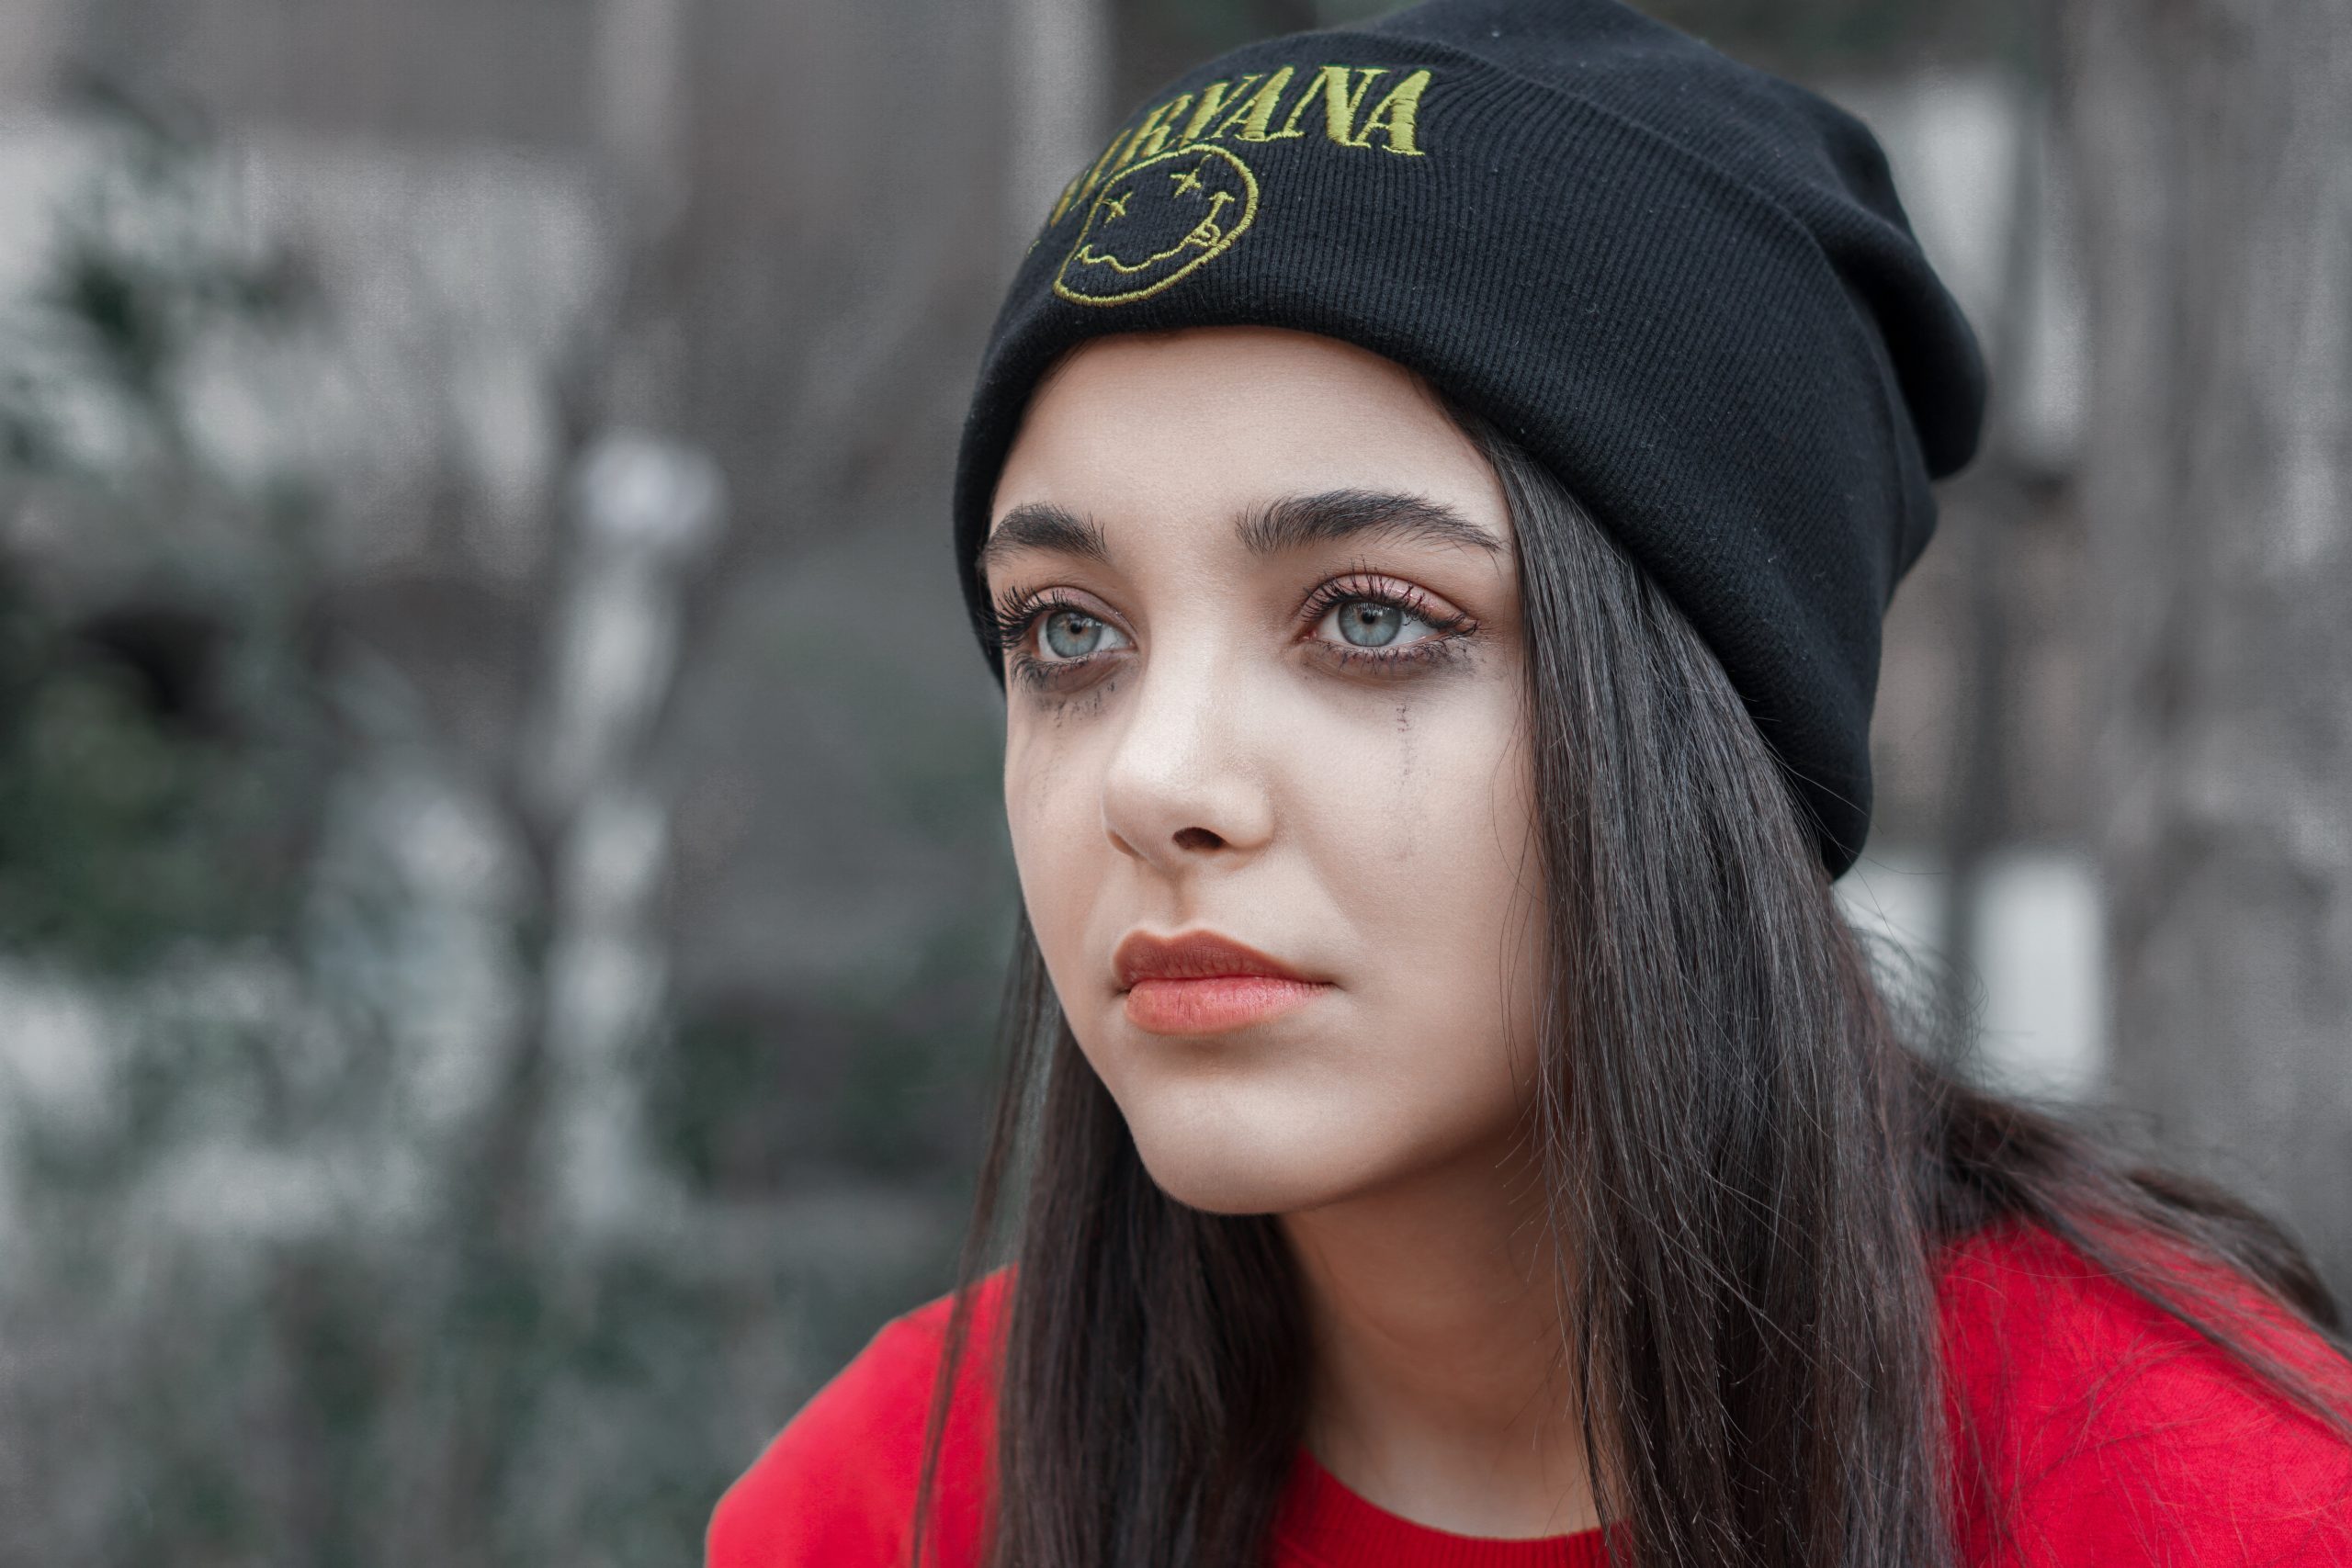 A white woman with pale skin and long, straight brunette hair stares out into space looking melancholy. She is wearing a black "Nirvana" beanie hat and has dark eye make up that is running down her face leaving dirty looking trails on her cheeks